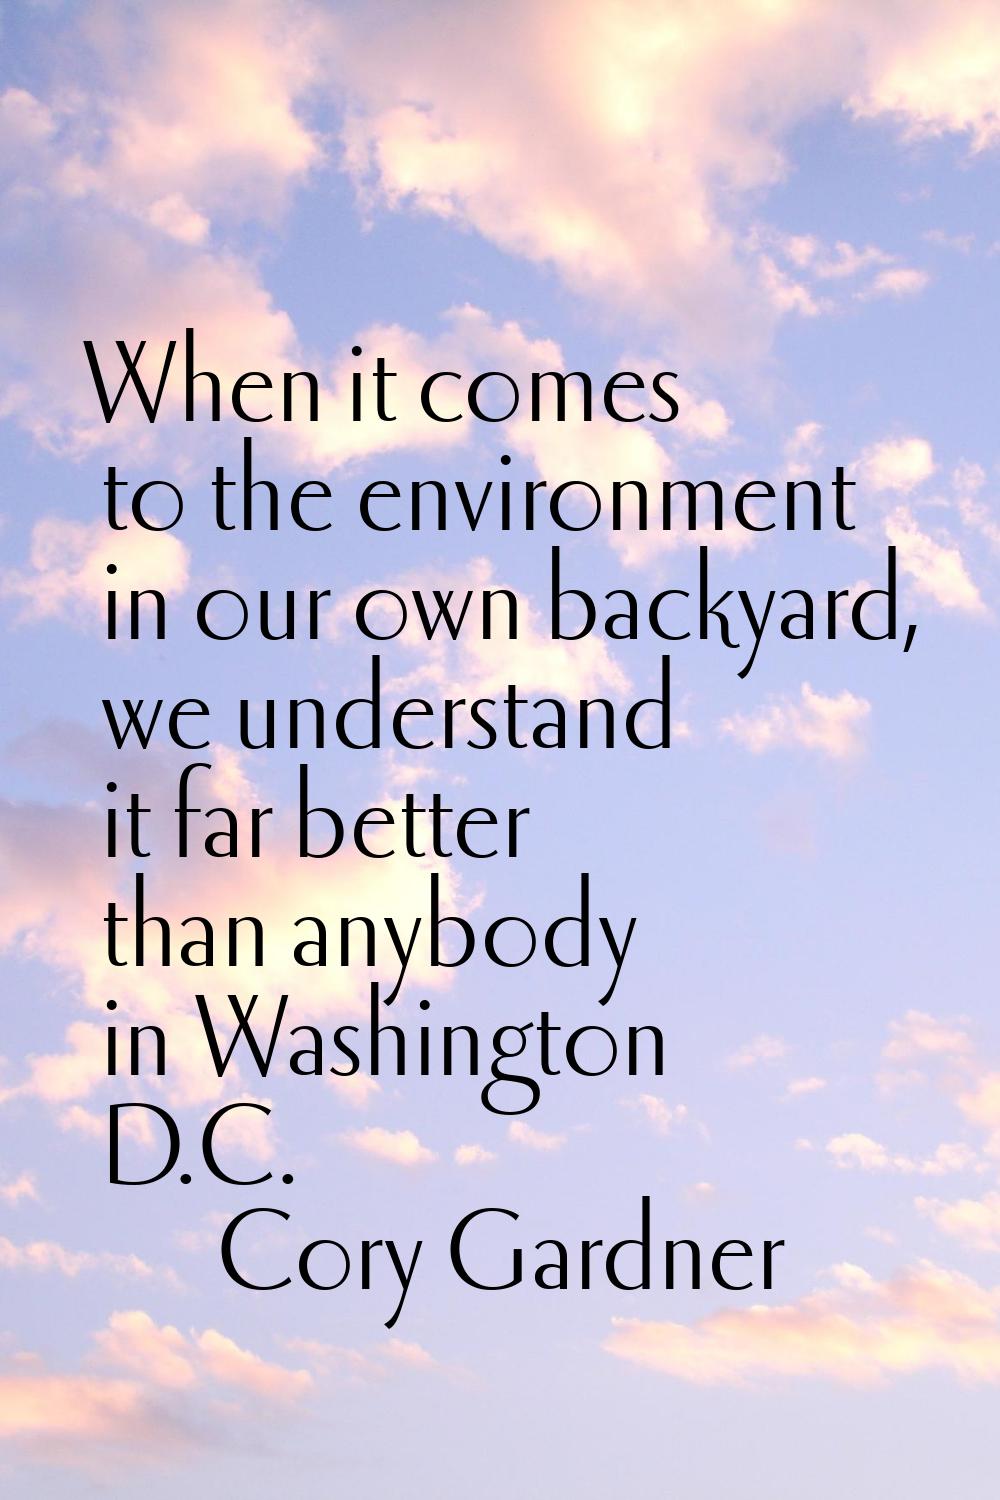 When it comes to the environment in our own backyard, we understand it far better than anybody in W